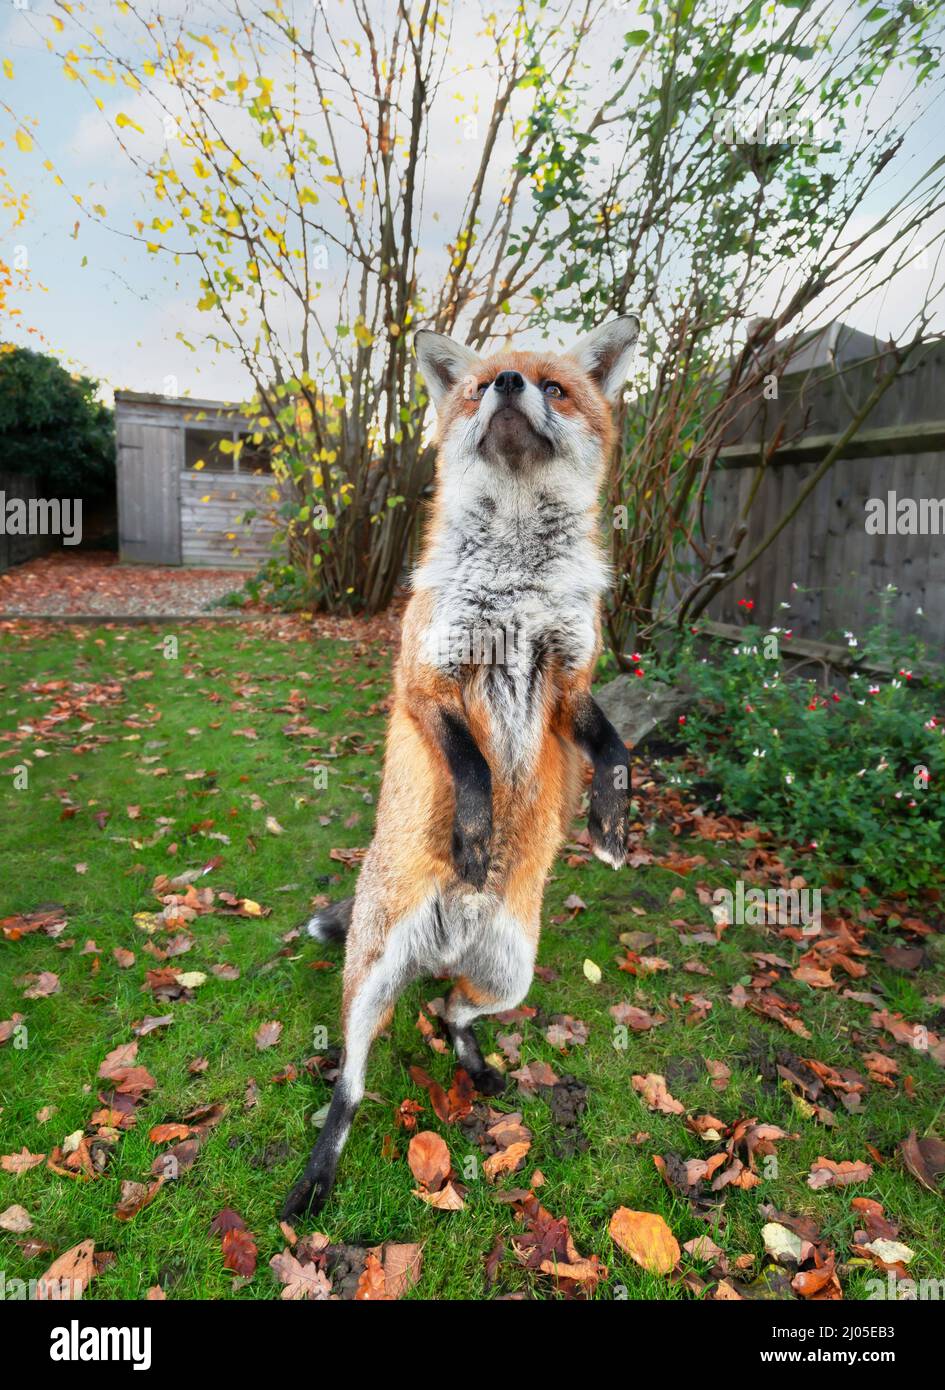 Close up of a red fox standing on hind legs among autumn leaves in a garden, UK. Stock Photo